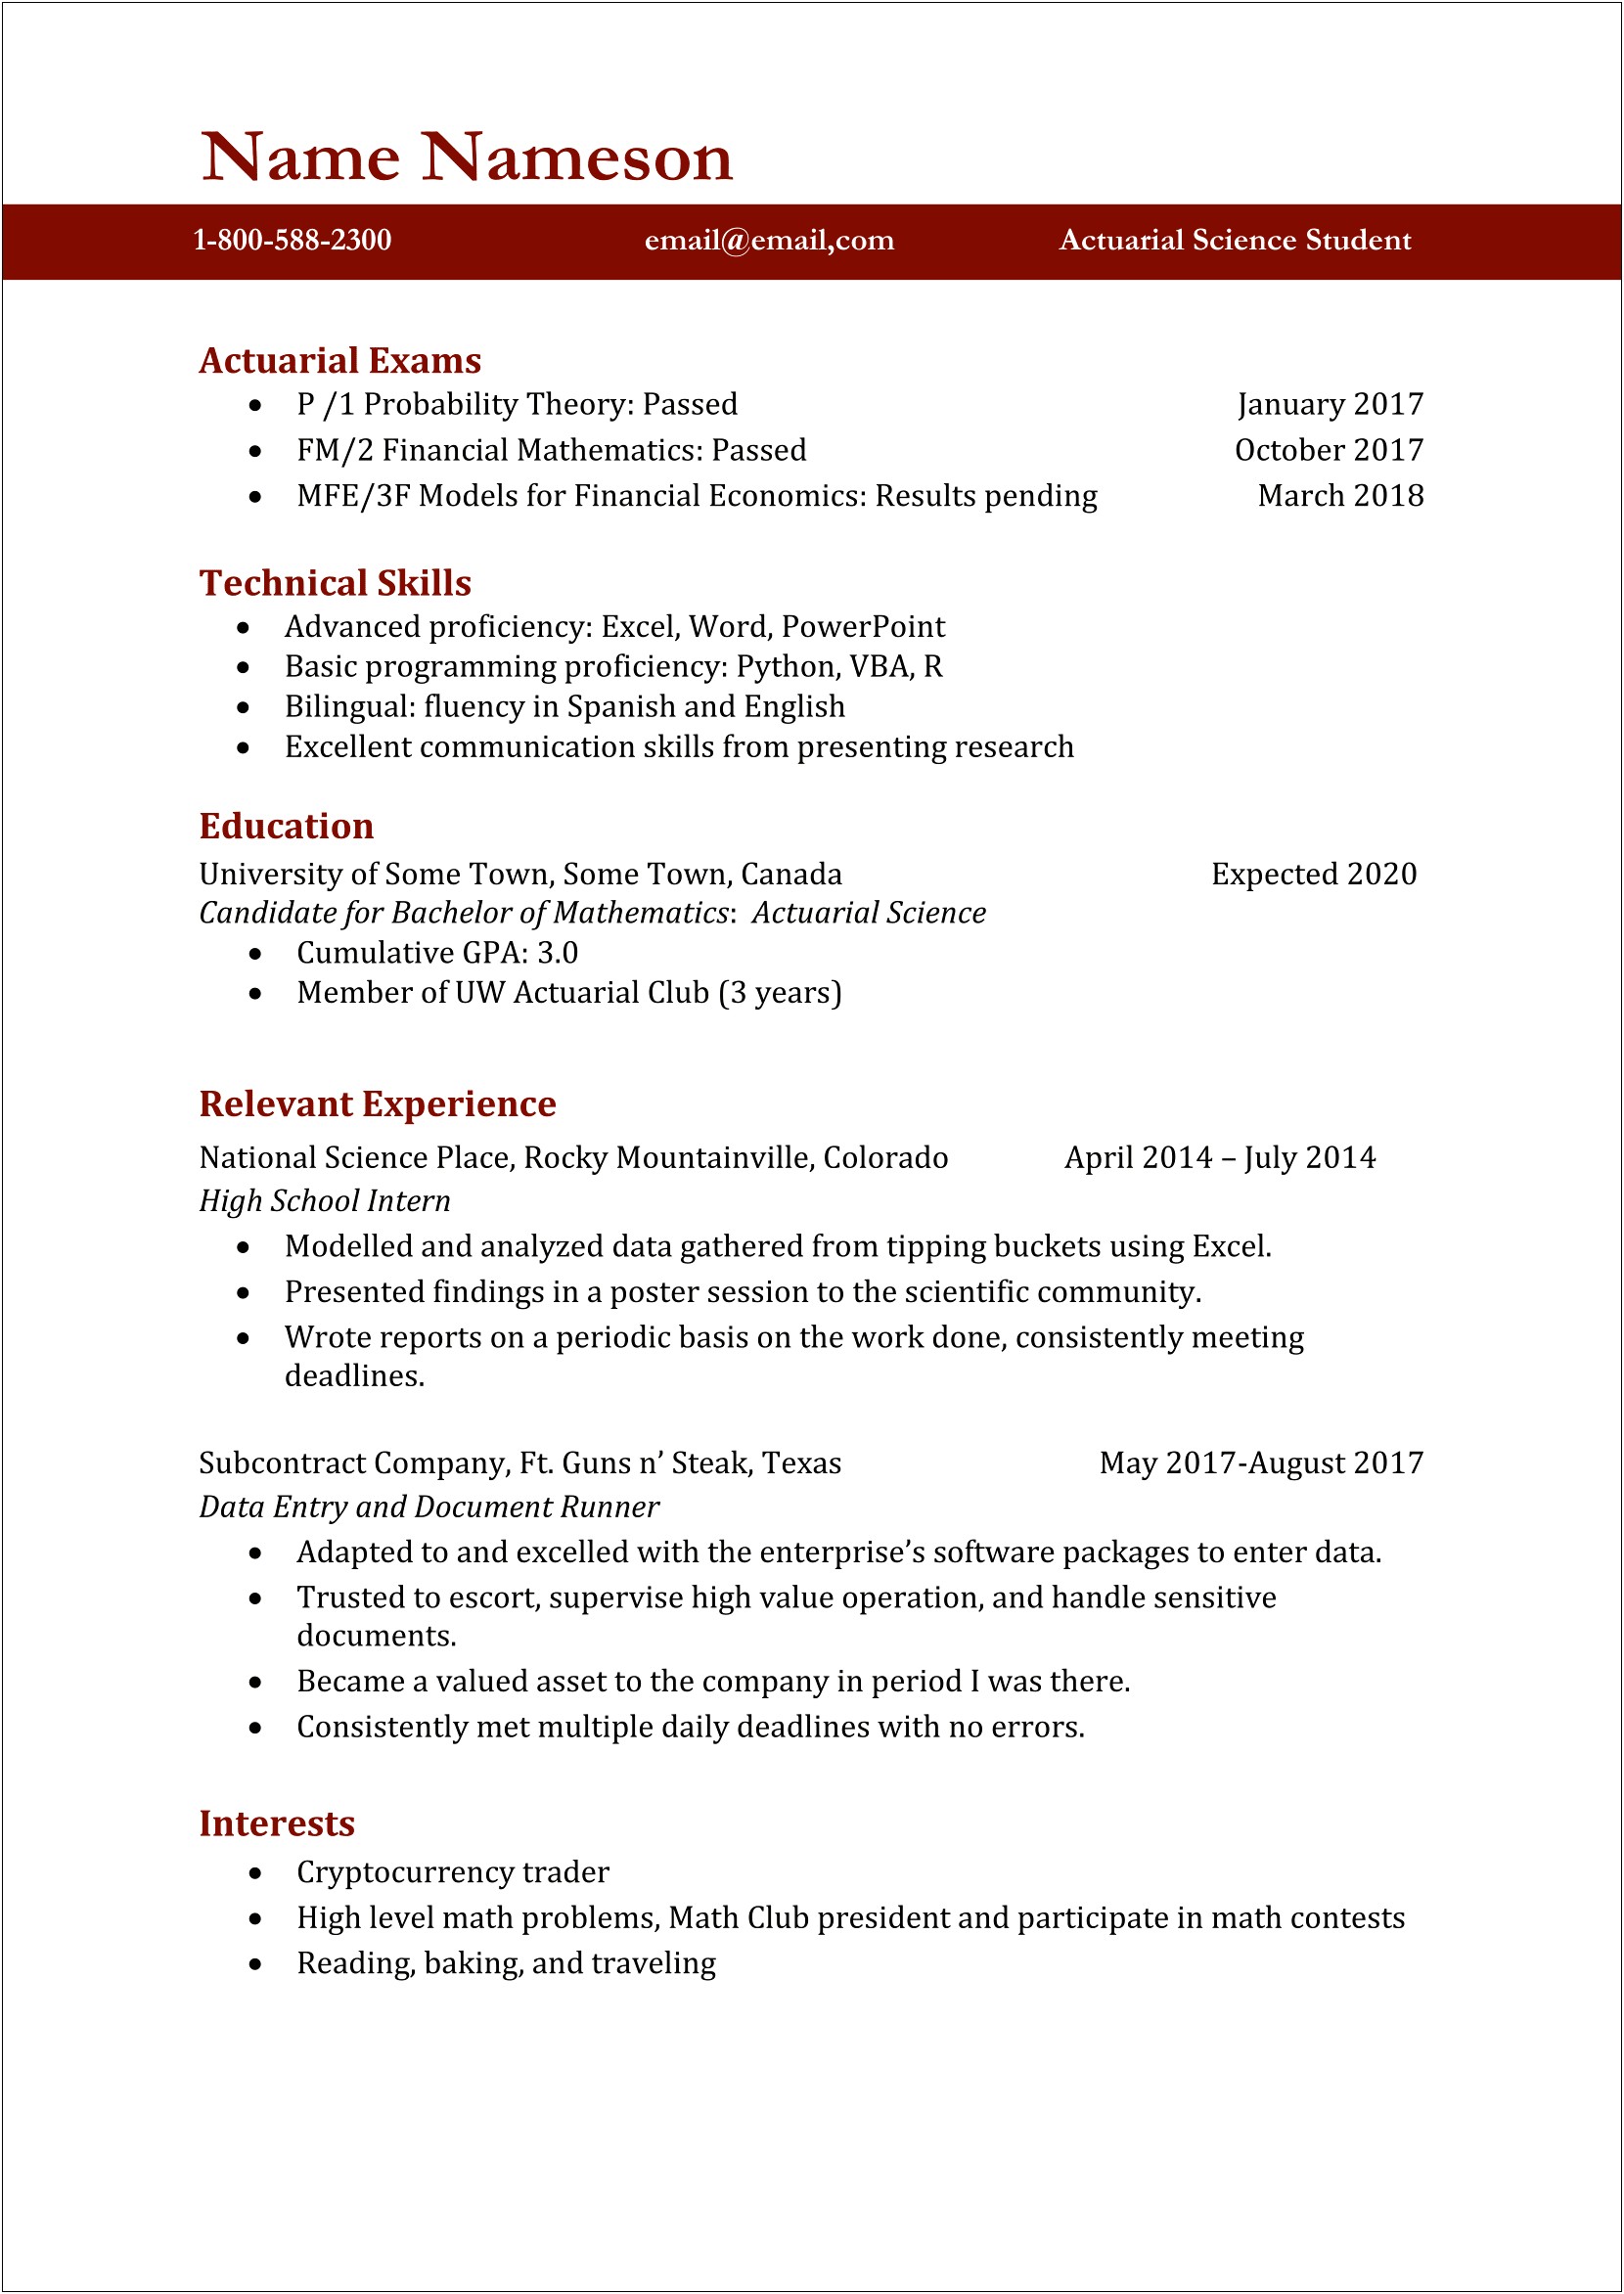 Economics Working In Actuary With No Experience Resume